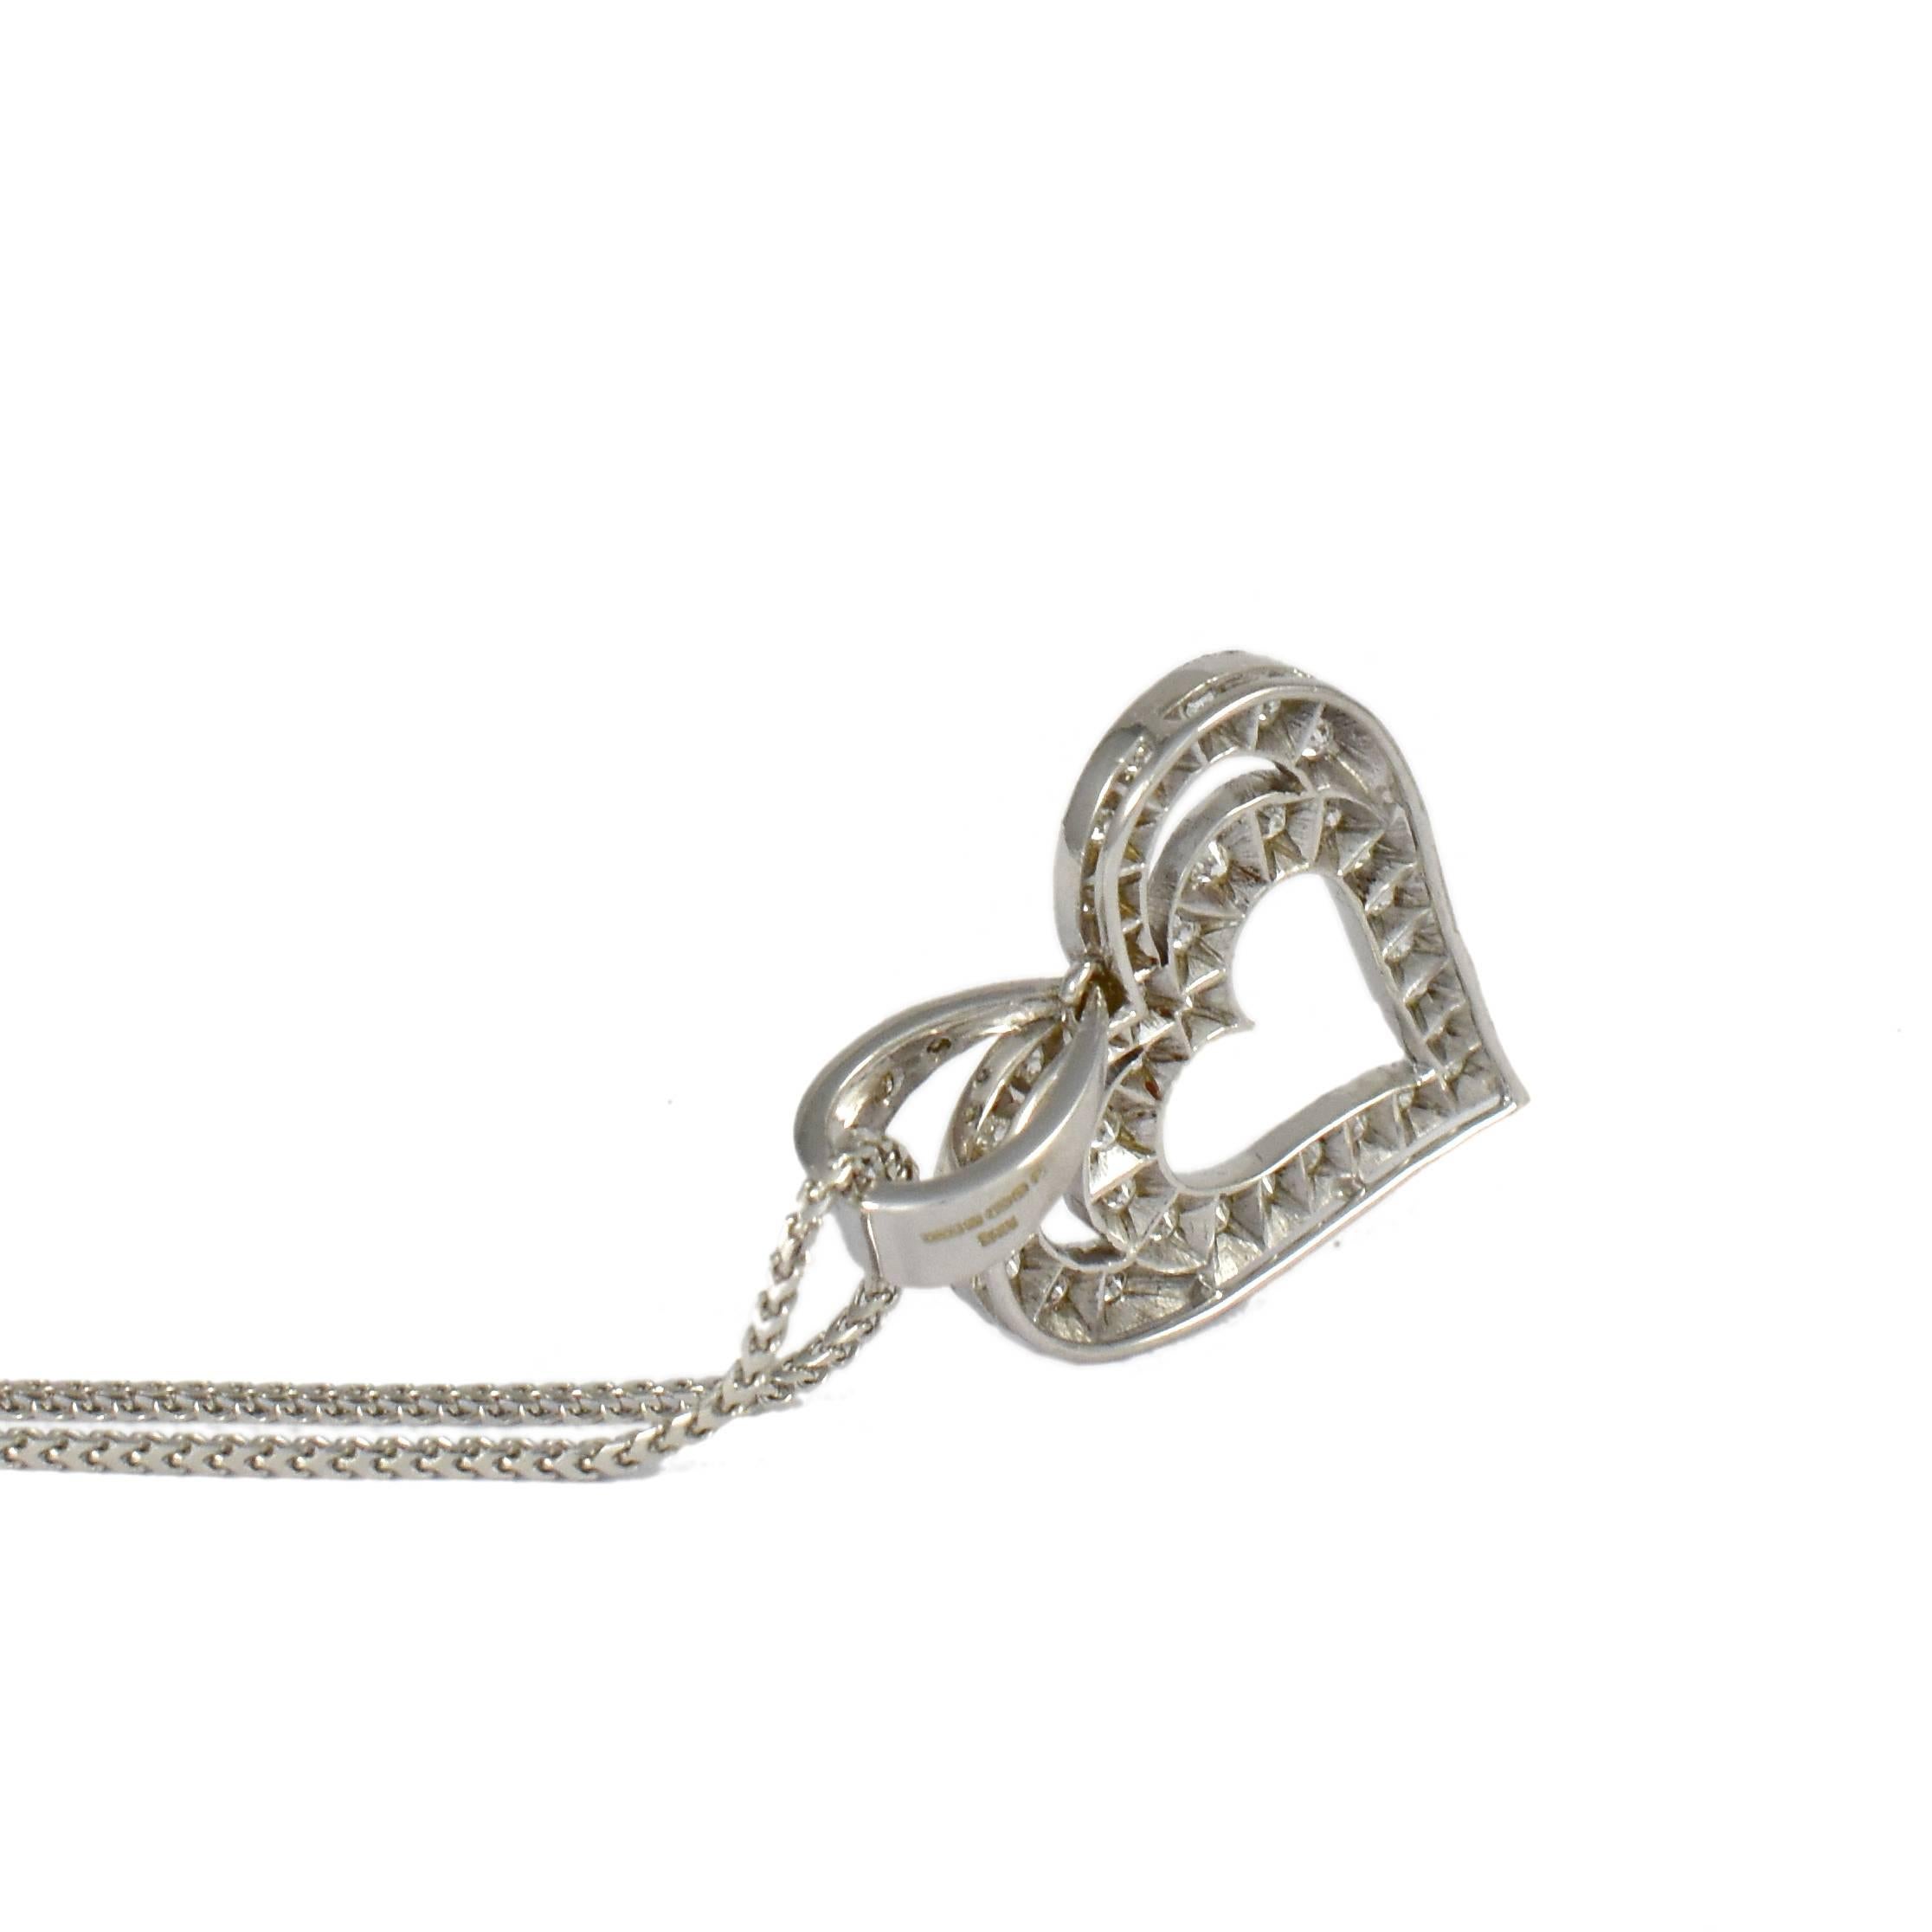 The Heart in Heart pendant necklace in 18 karat white gold is set with round brilliant diamonds and comes with a matching 18 karat white gold chain. A modern timeless pendant cleverly uses considered negative space to highlight the detail of the